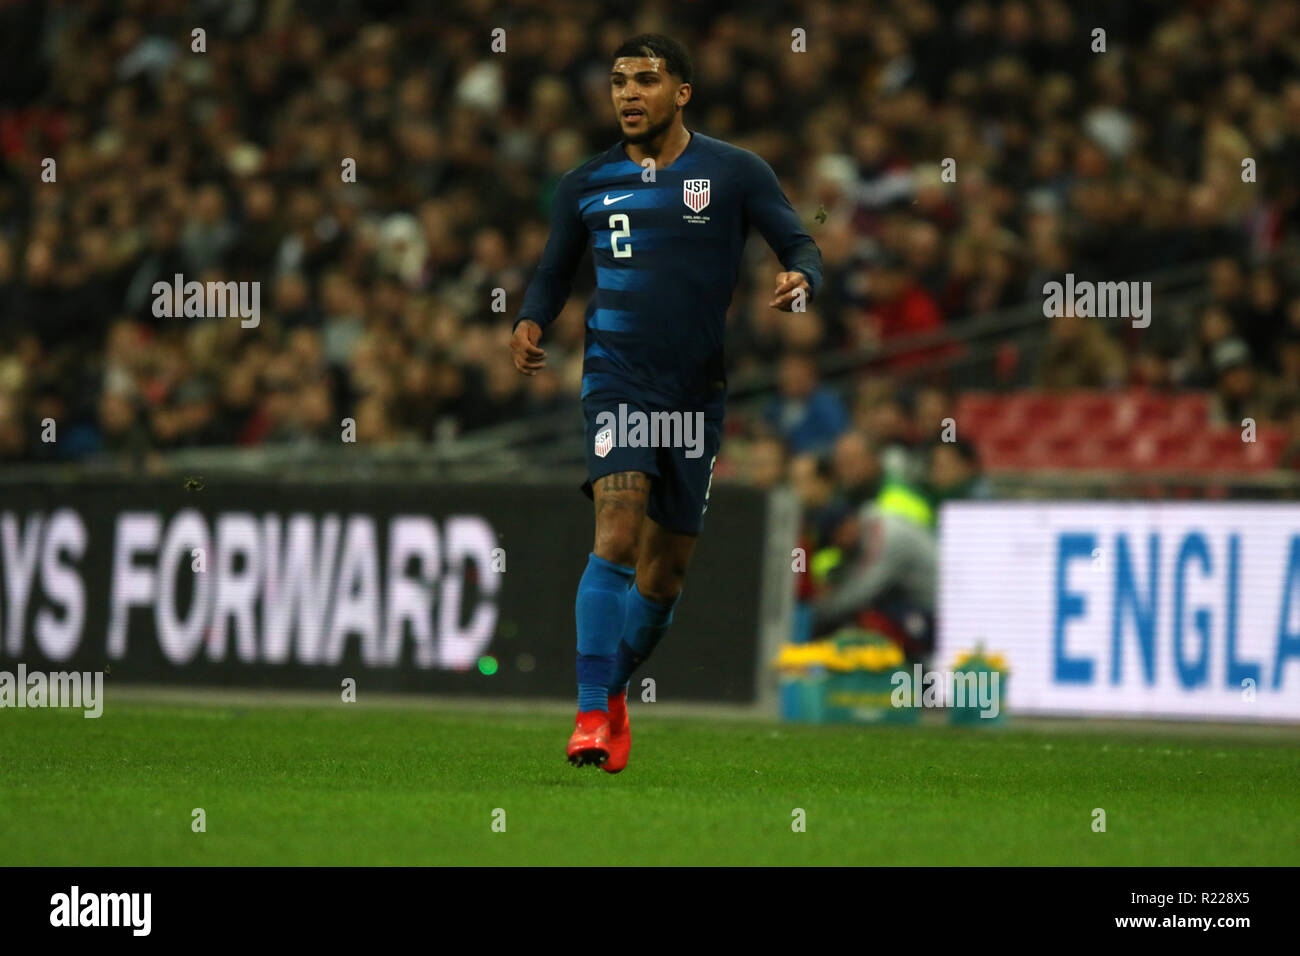 London, UK. 15th November, 2018. DeAndre Yedlin (USA) at the England v USA game (Wayne Rooney's last England game) at Wembley Stadium, London, November 15, 2018. **This picture is for editorial use ONLY** Credit: Paul Marriott/Alamy Live News Stock Photo